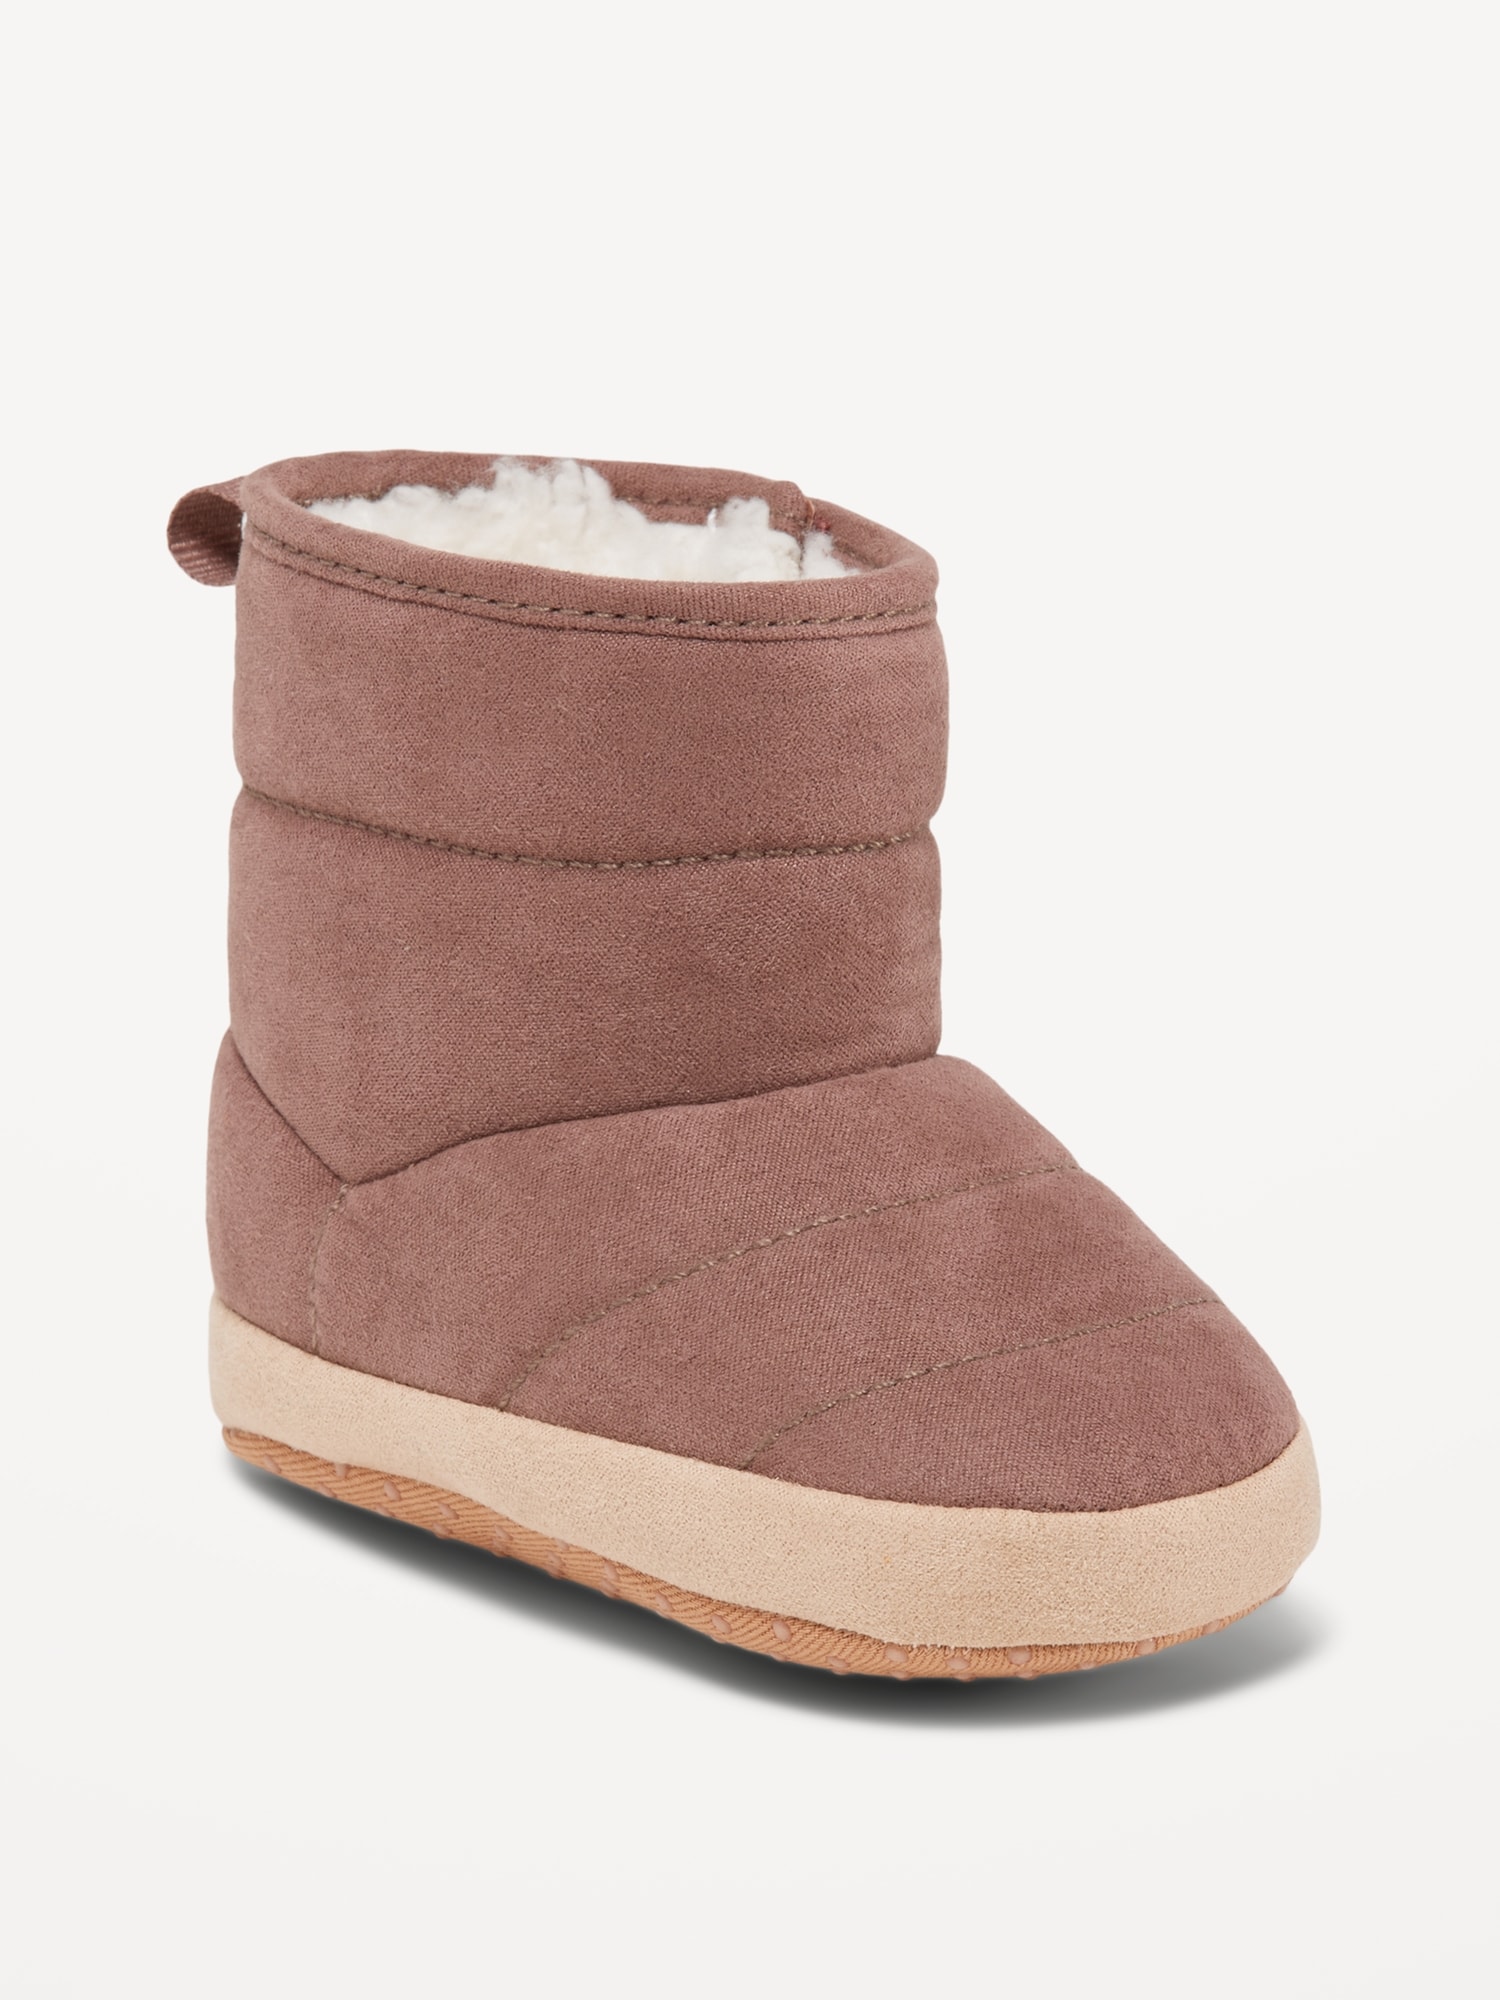 Oldnavy Unisex Faux-Suede Sherpa-Lined Boots for Baby